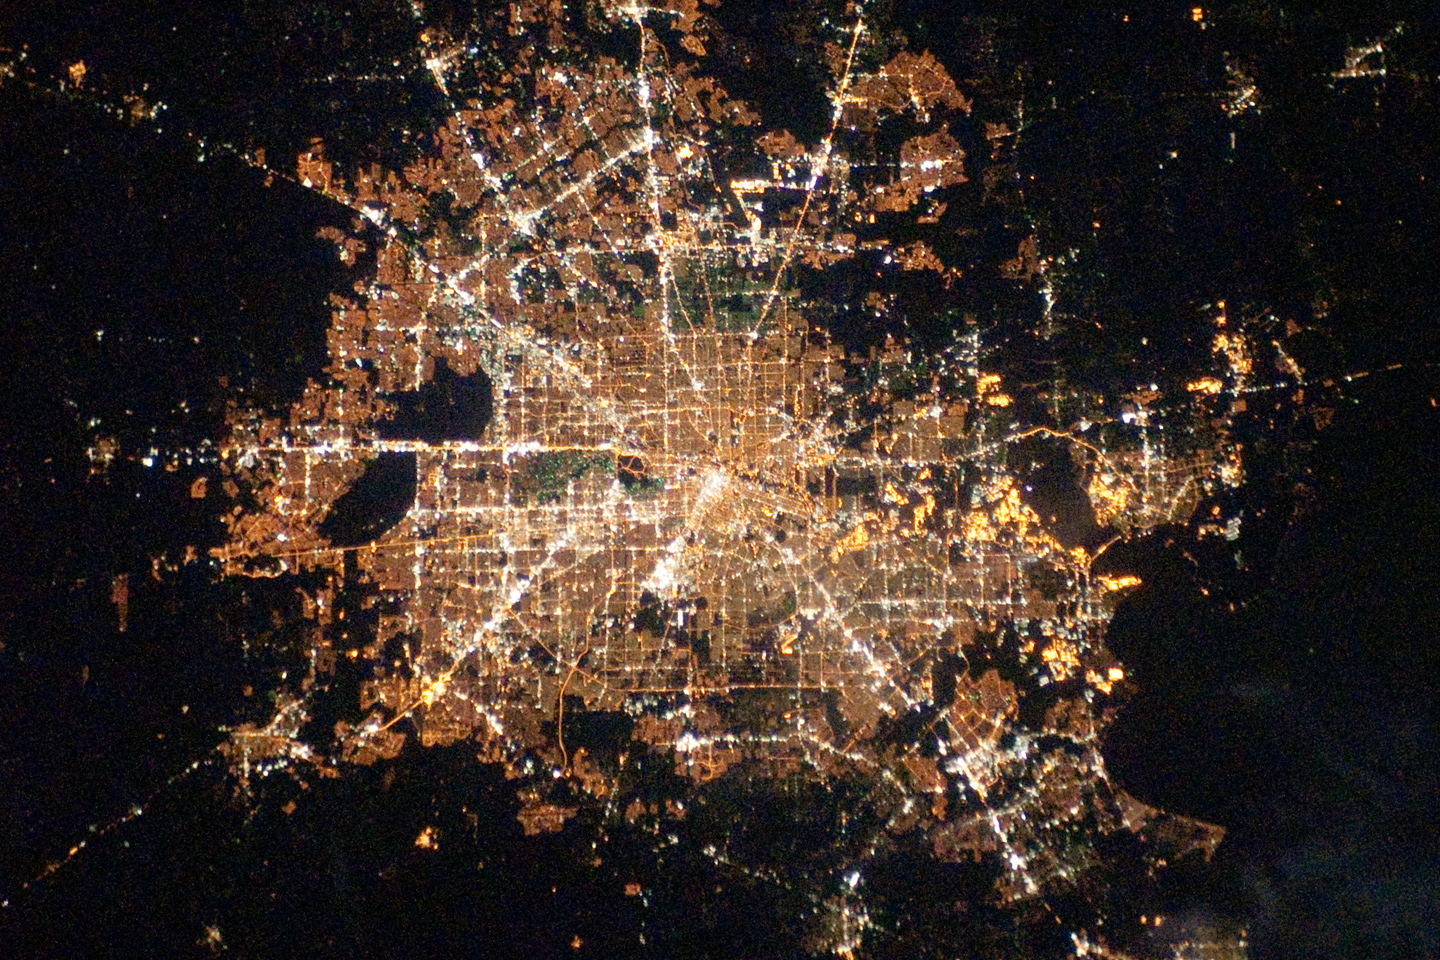 Photo of Houston at night taken by astronauts